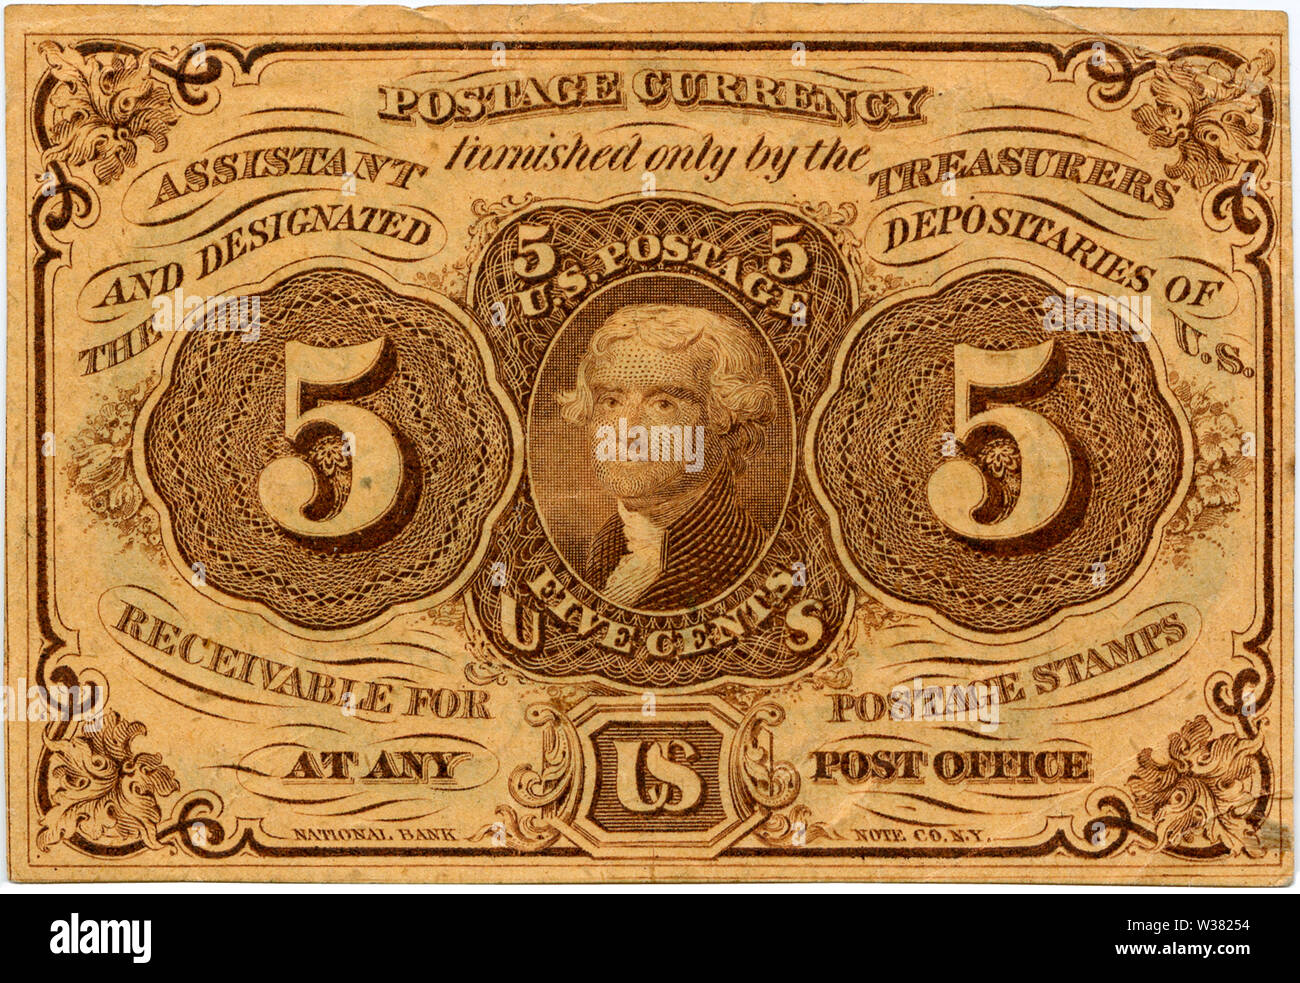 Five-cent US Postal Currency, first issue, featuring Thomas Jefferson.  Gold, silver and copper coins were horded at the start of the Civil War and  postages stamps became a popular form of currency;